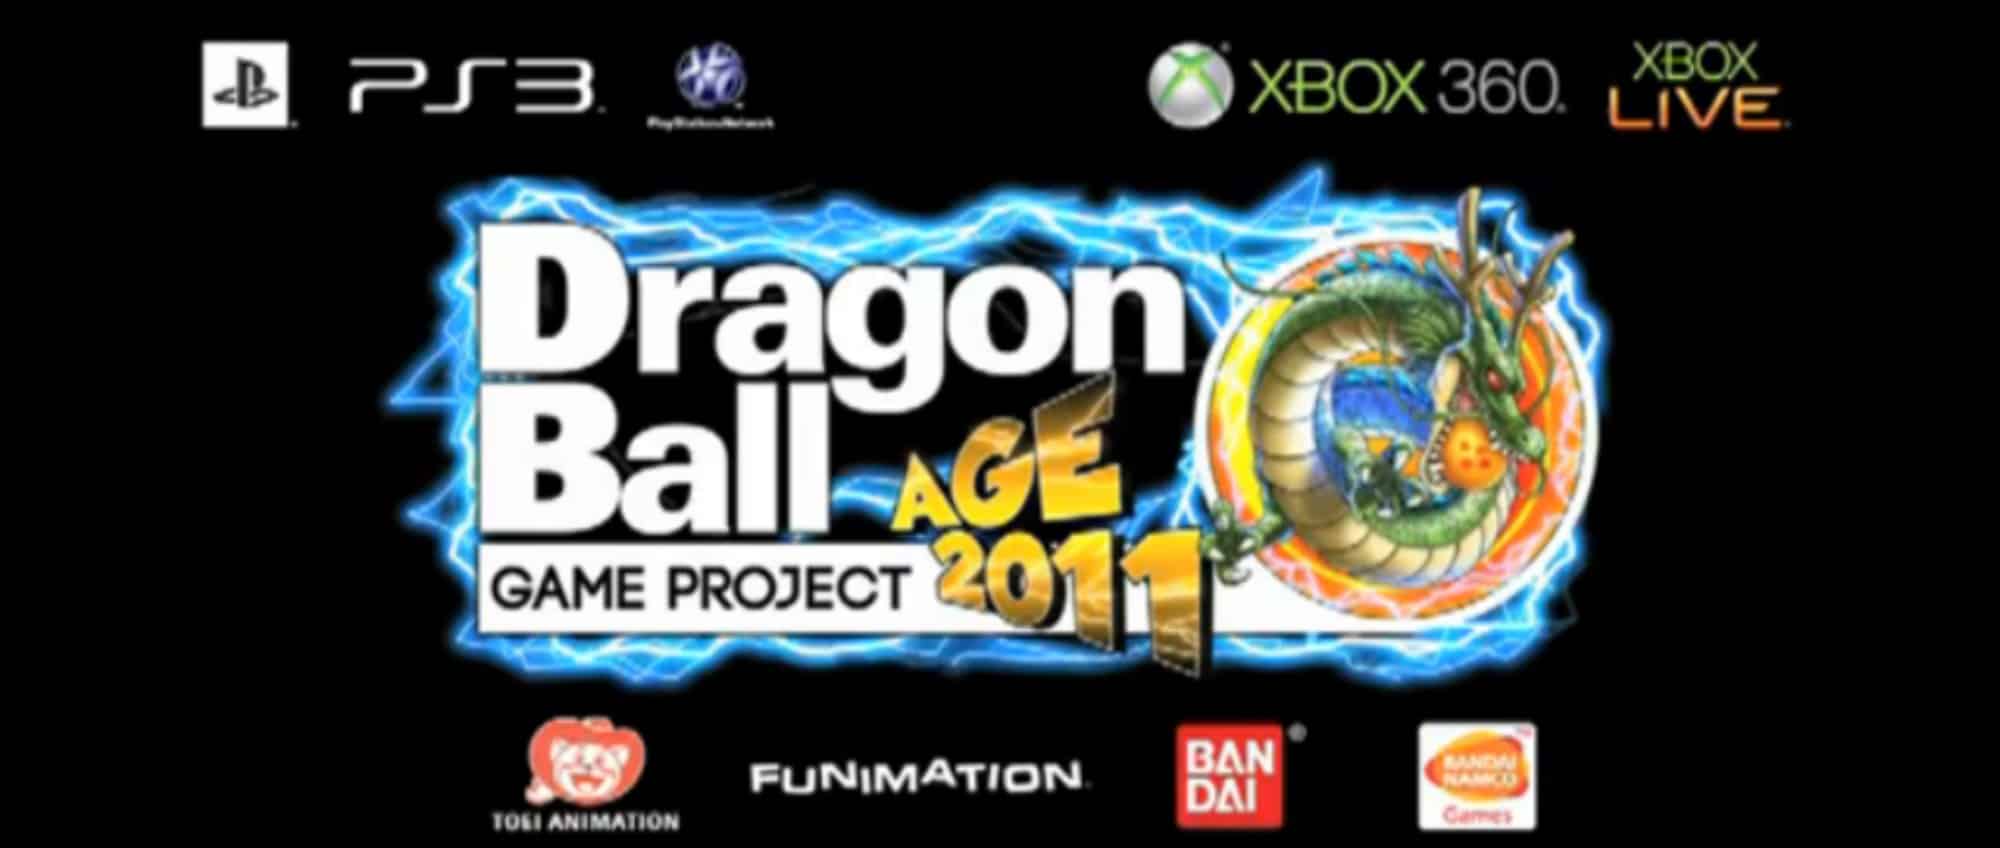 Dragon+ball+z+games+for+ps3+2011